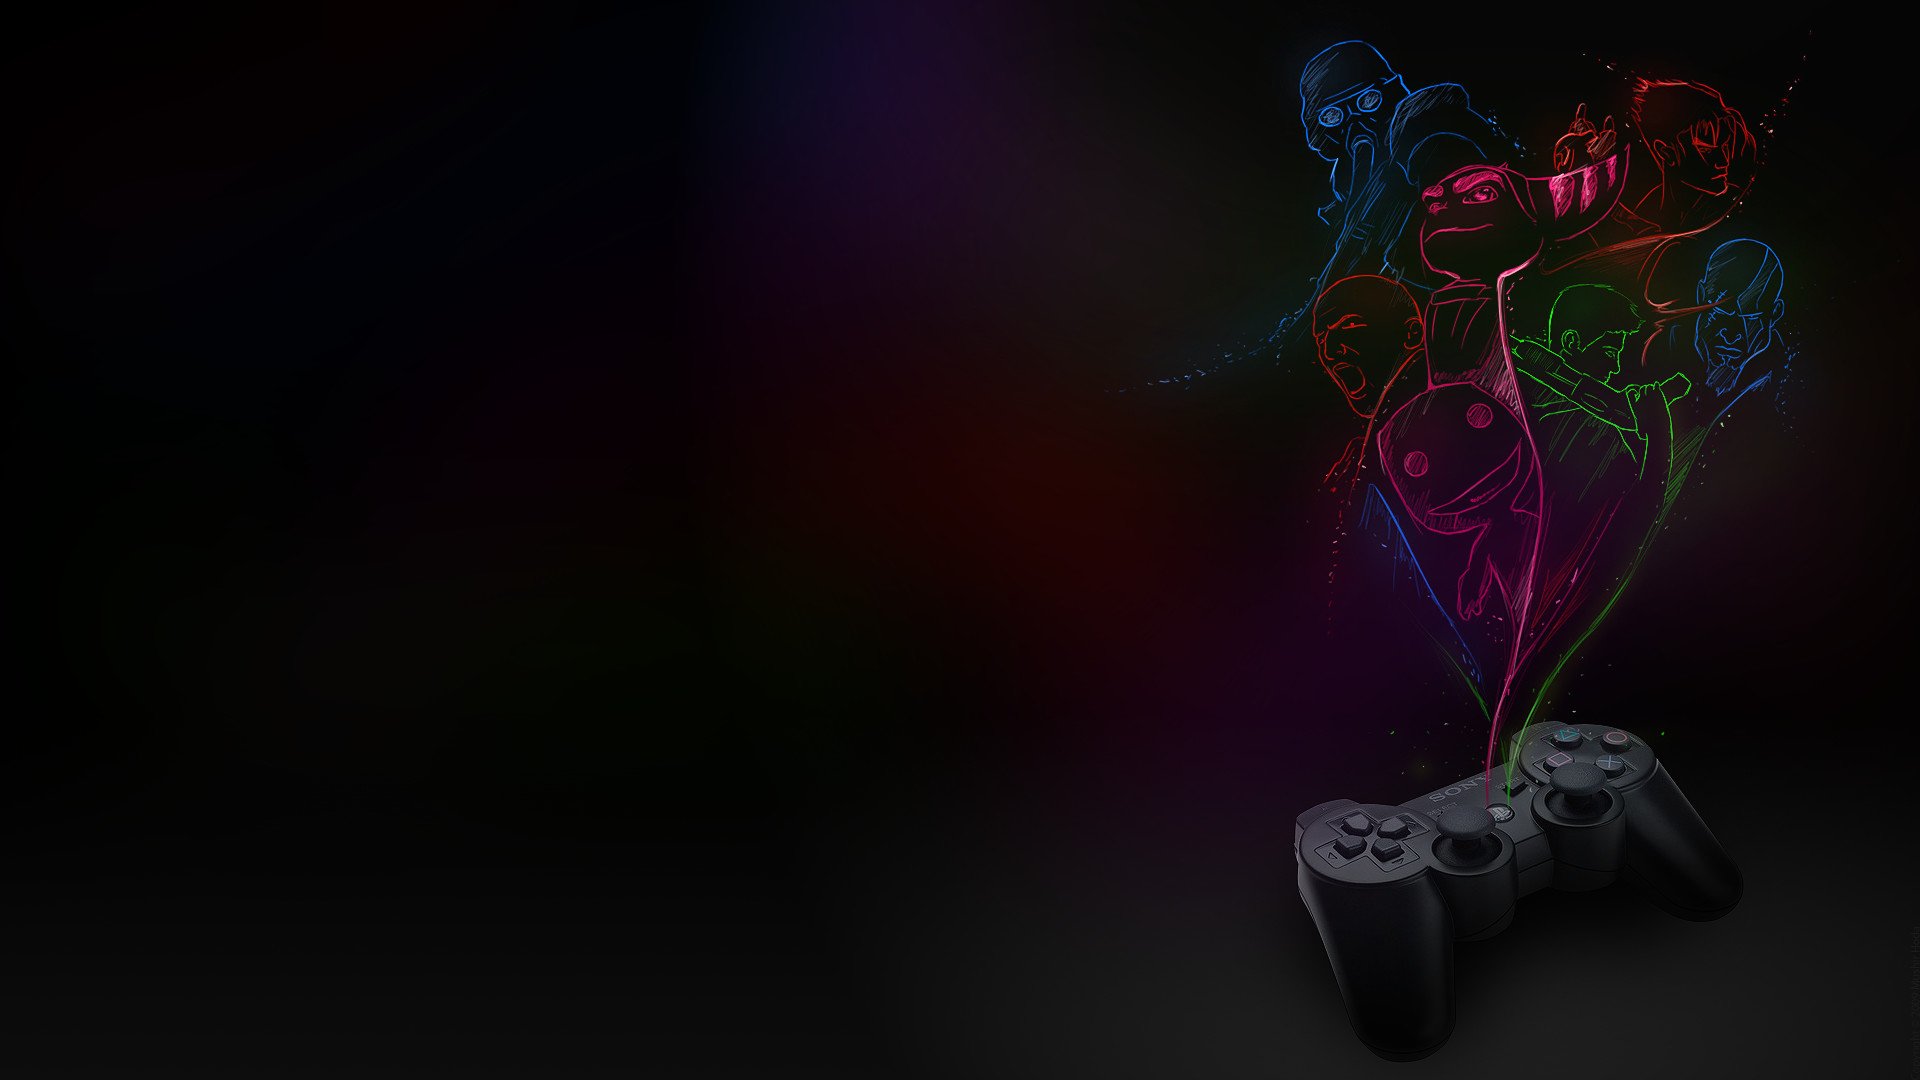 1920x1080 Ps3 Backgrounds | Wallpapers, Backgrounds, Images, Art Photos.